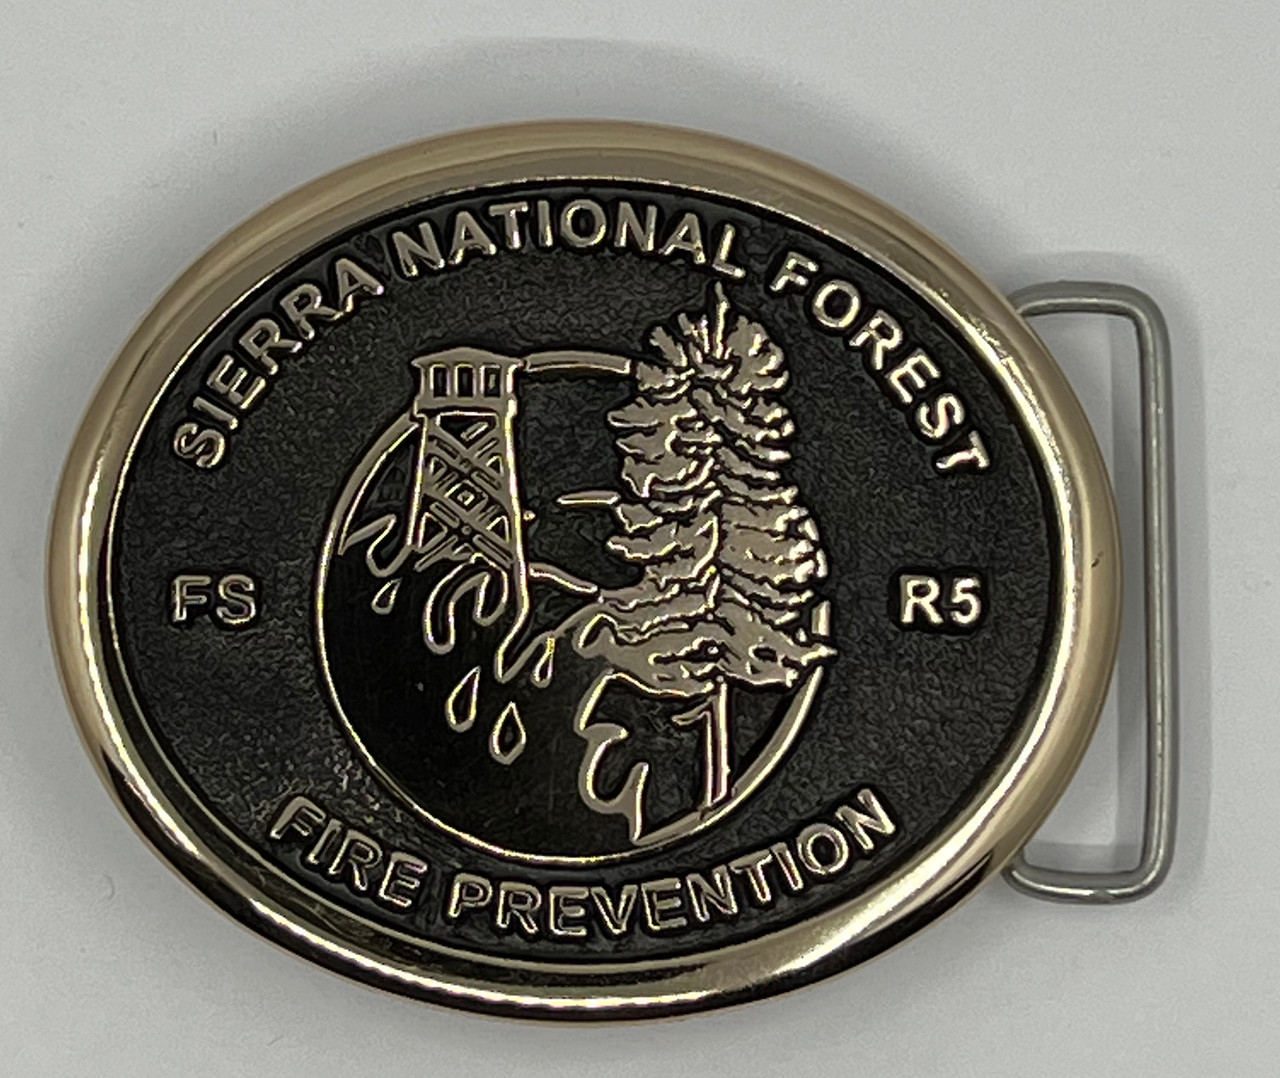 Sierra National Forest Fire Prevention R5 Buckle (RESTRICTED)